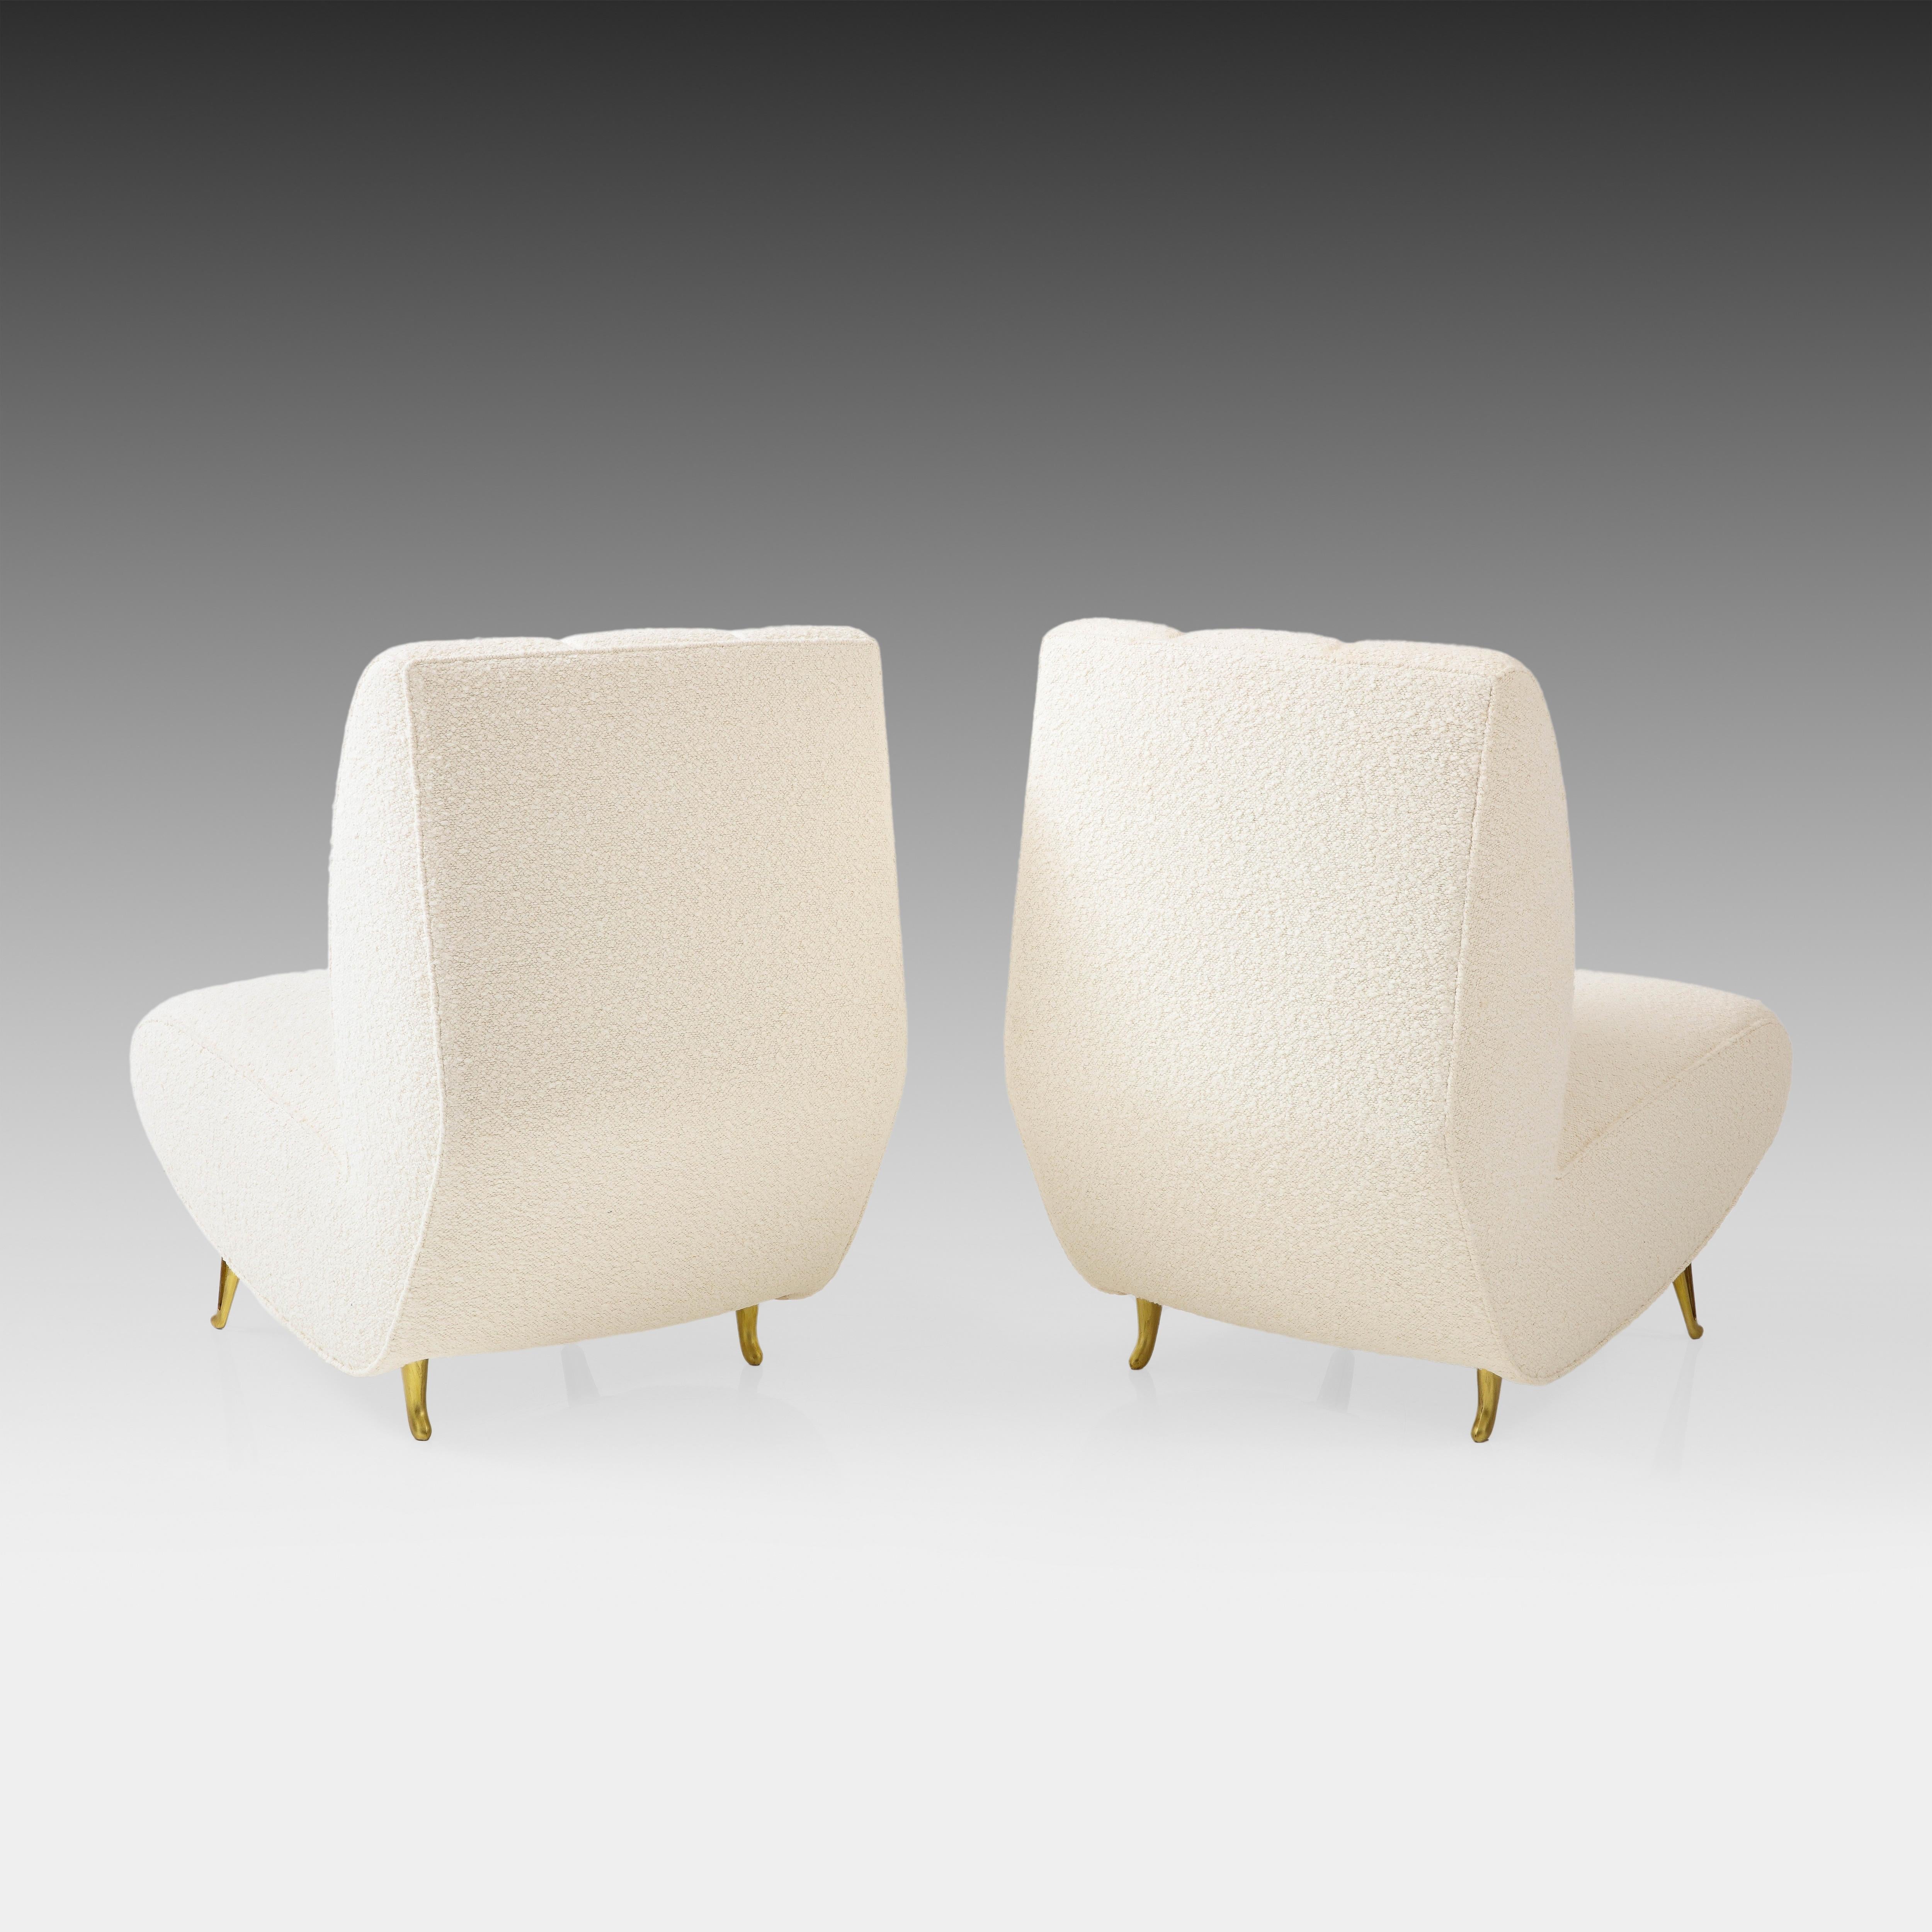 Metal ISA Bergamo Rare Pair of Lounge or Slipper Chairs in Ivory Bouclé, Italy, 1950s For Sale